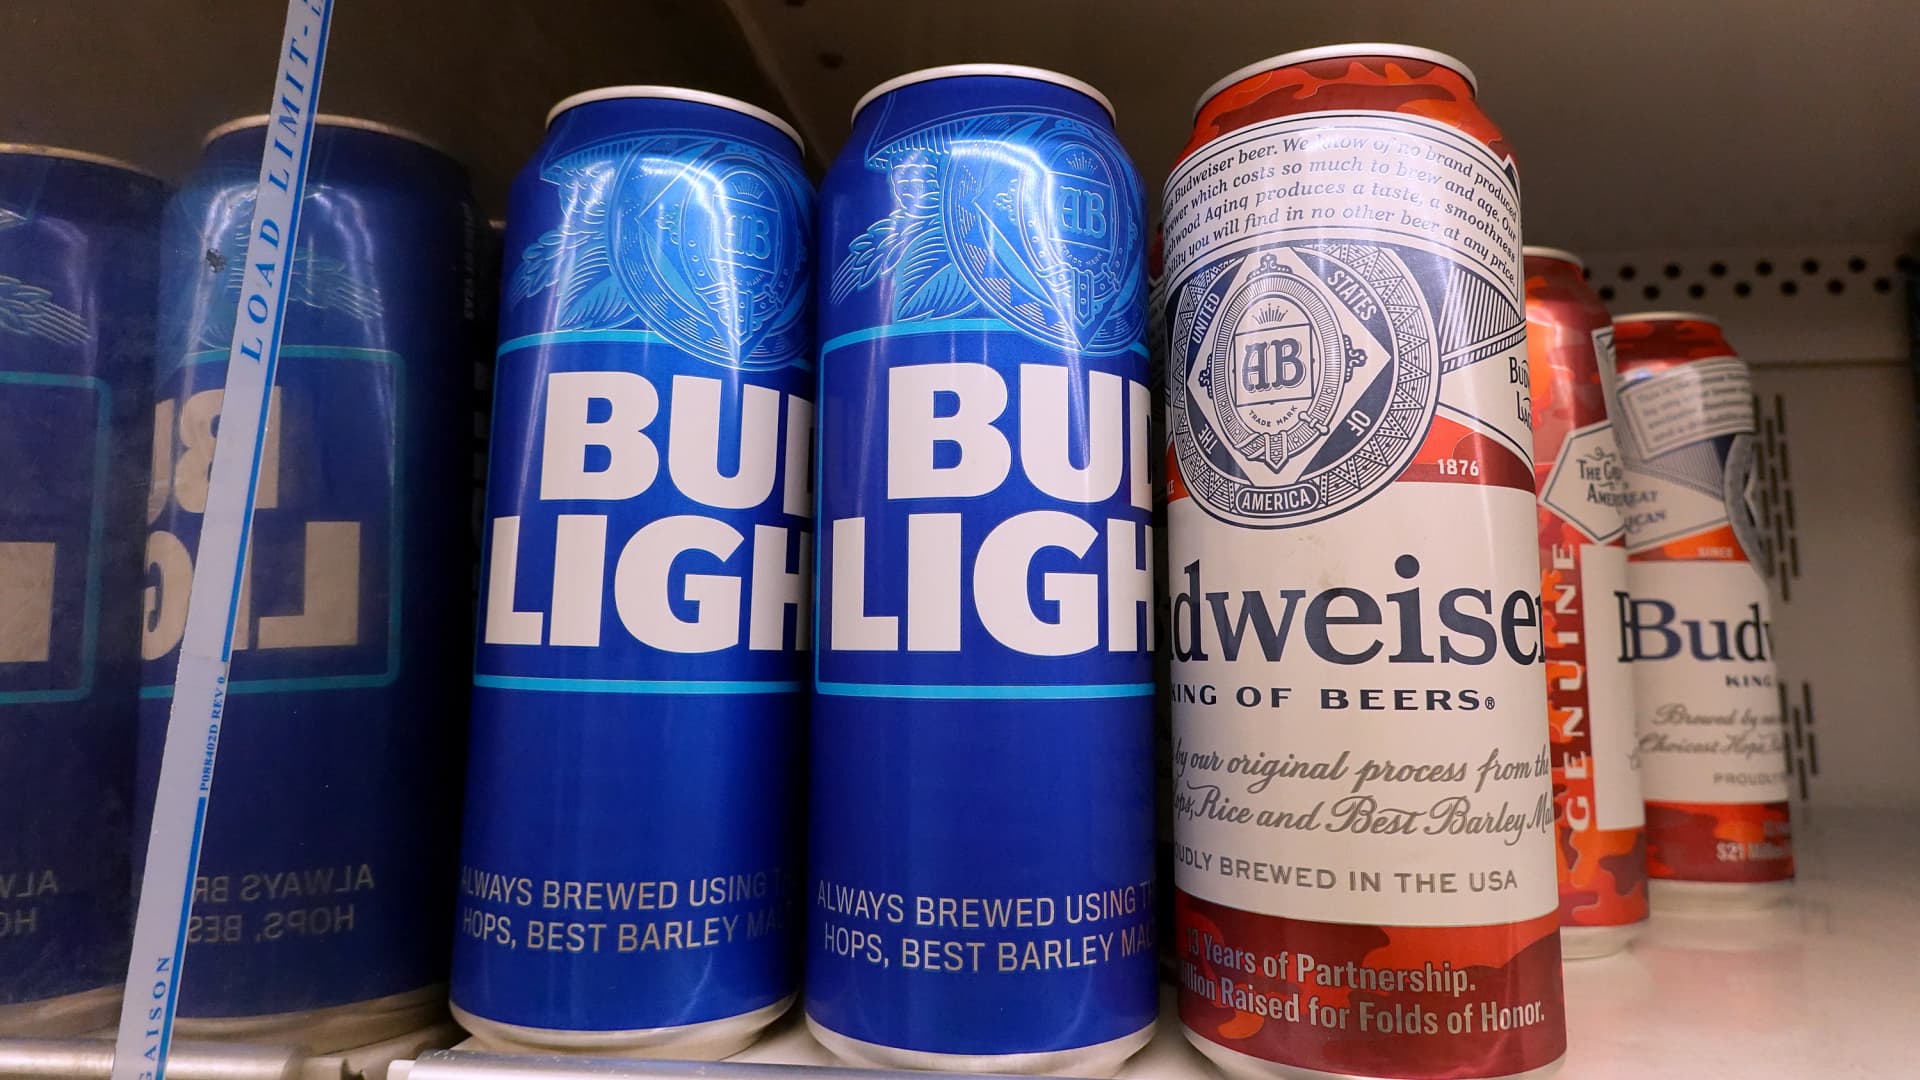 Bud Light continues to weigh on AB InBev results, but revenue climbs